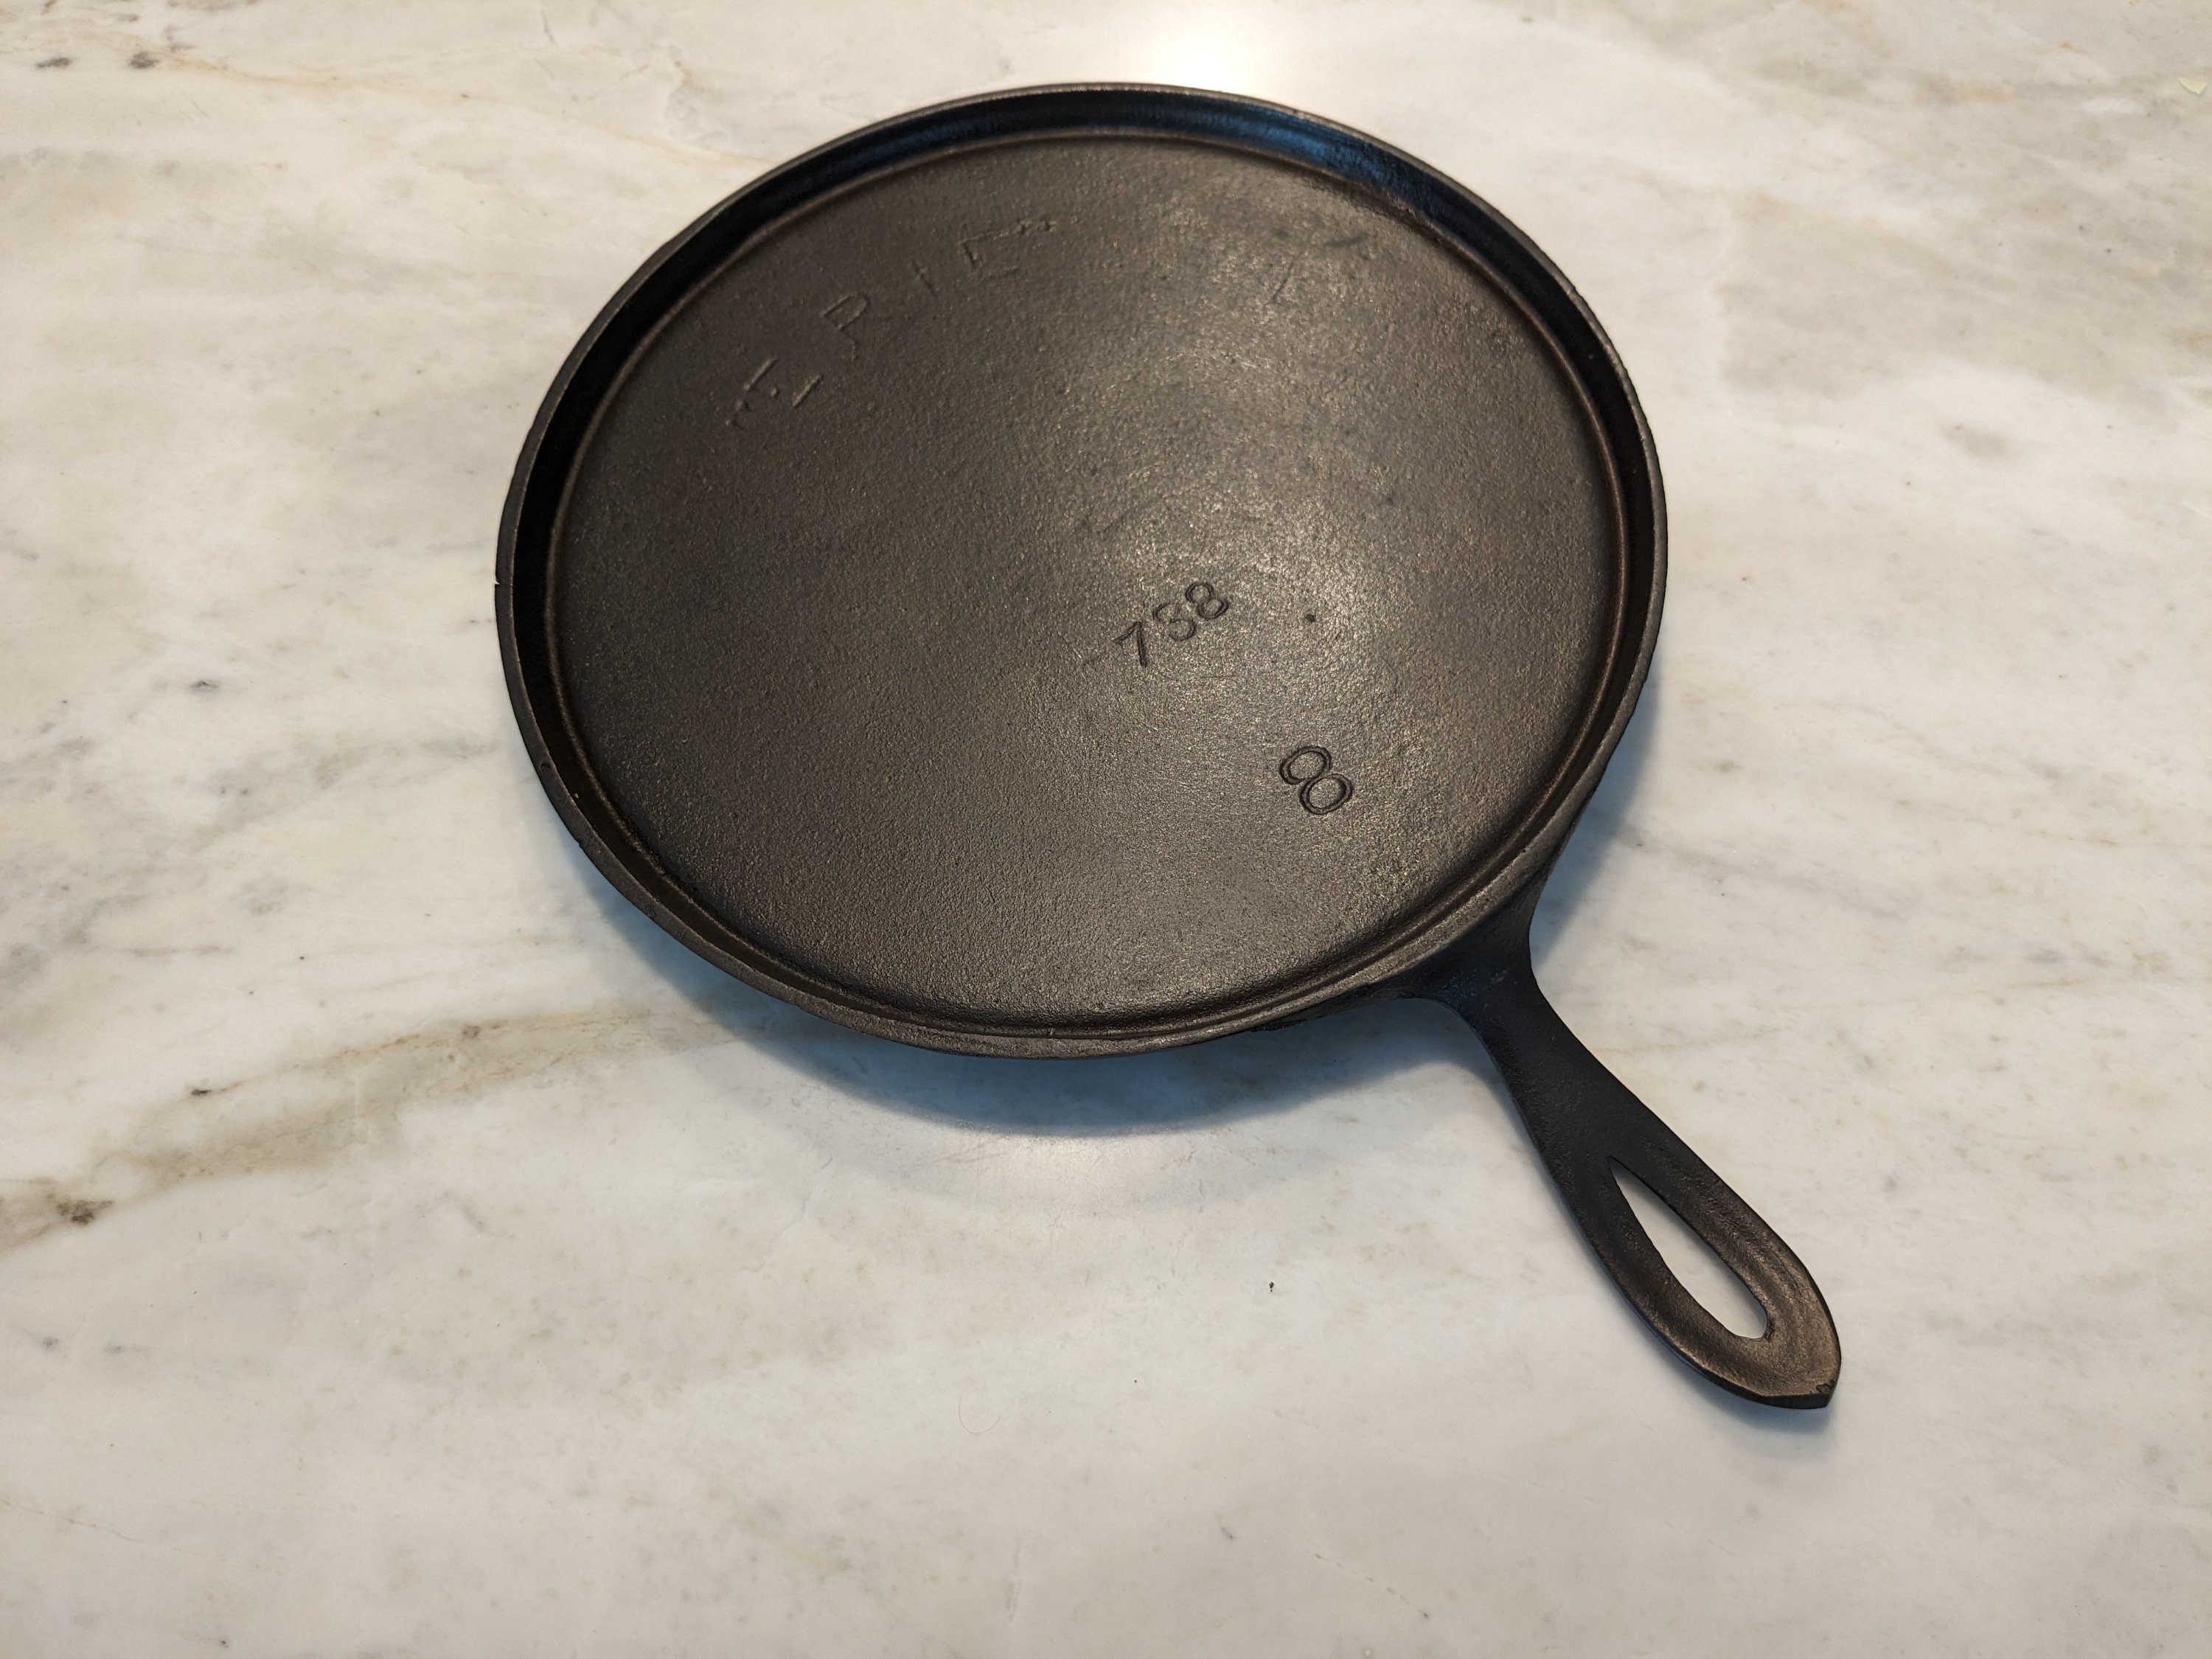  Replacement P08-525 Electric Skillet Base Fits